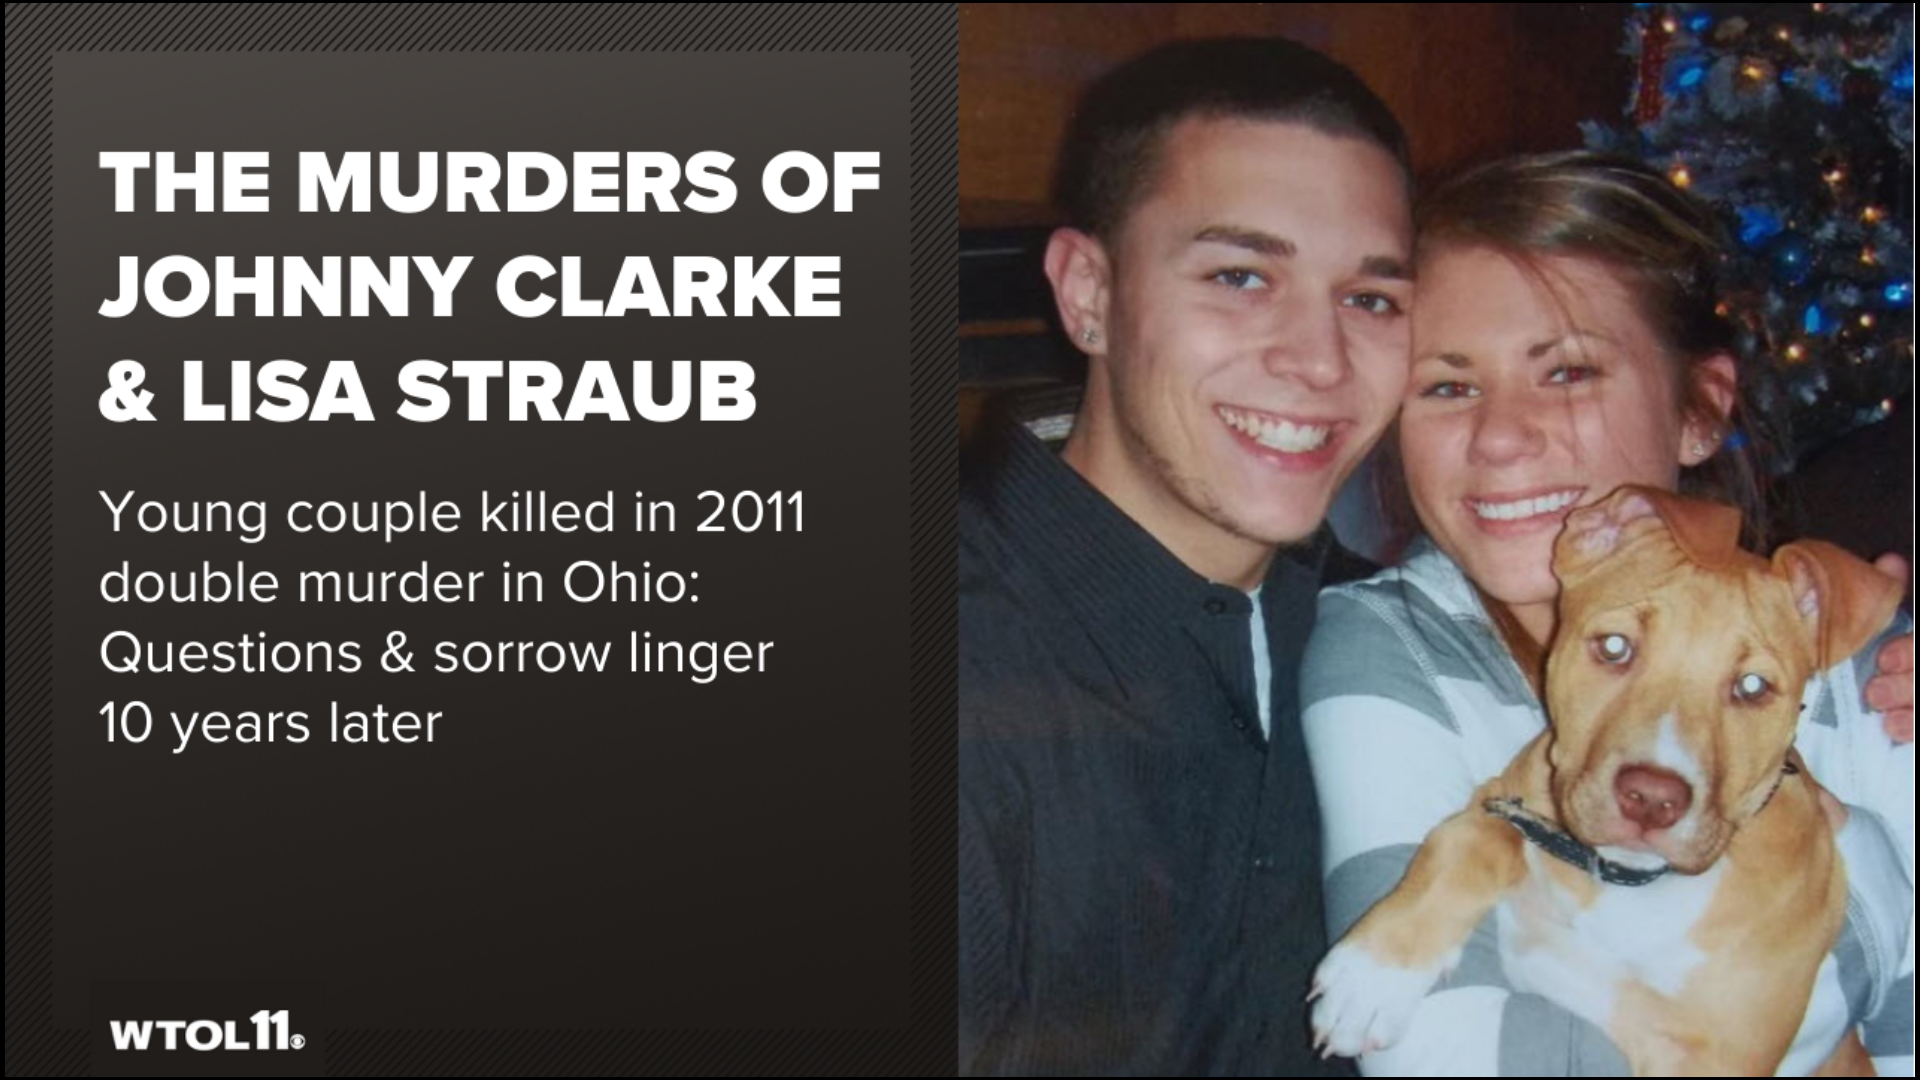 When Johnny Clarke and Lisa Straub were killed inside an Ohio home in true crime brutal murders on Jan. 30, 2011, it shocked the community.